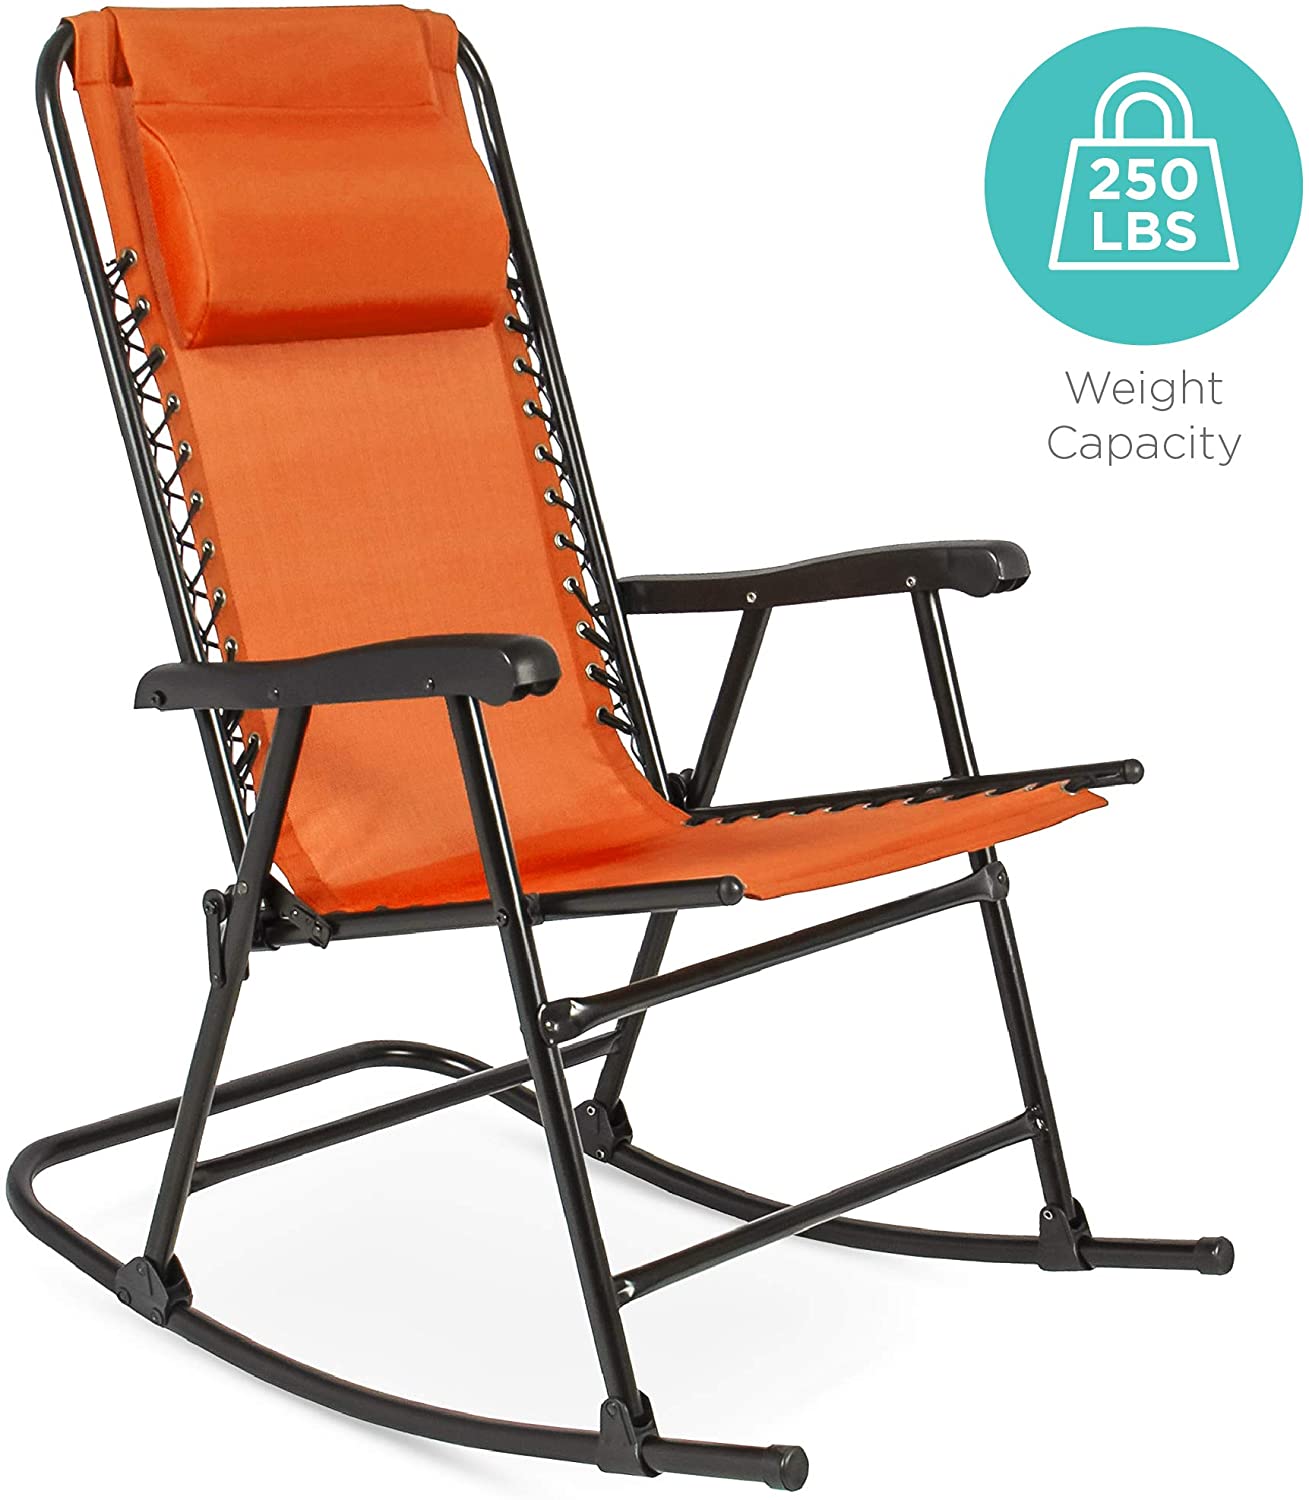 Best Choice Products Foldable Zero Gravity Rocking Patio Recliner Chair Orange